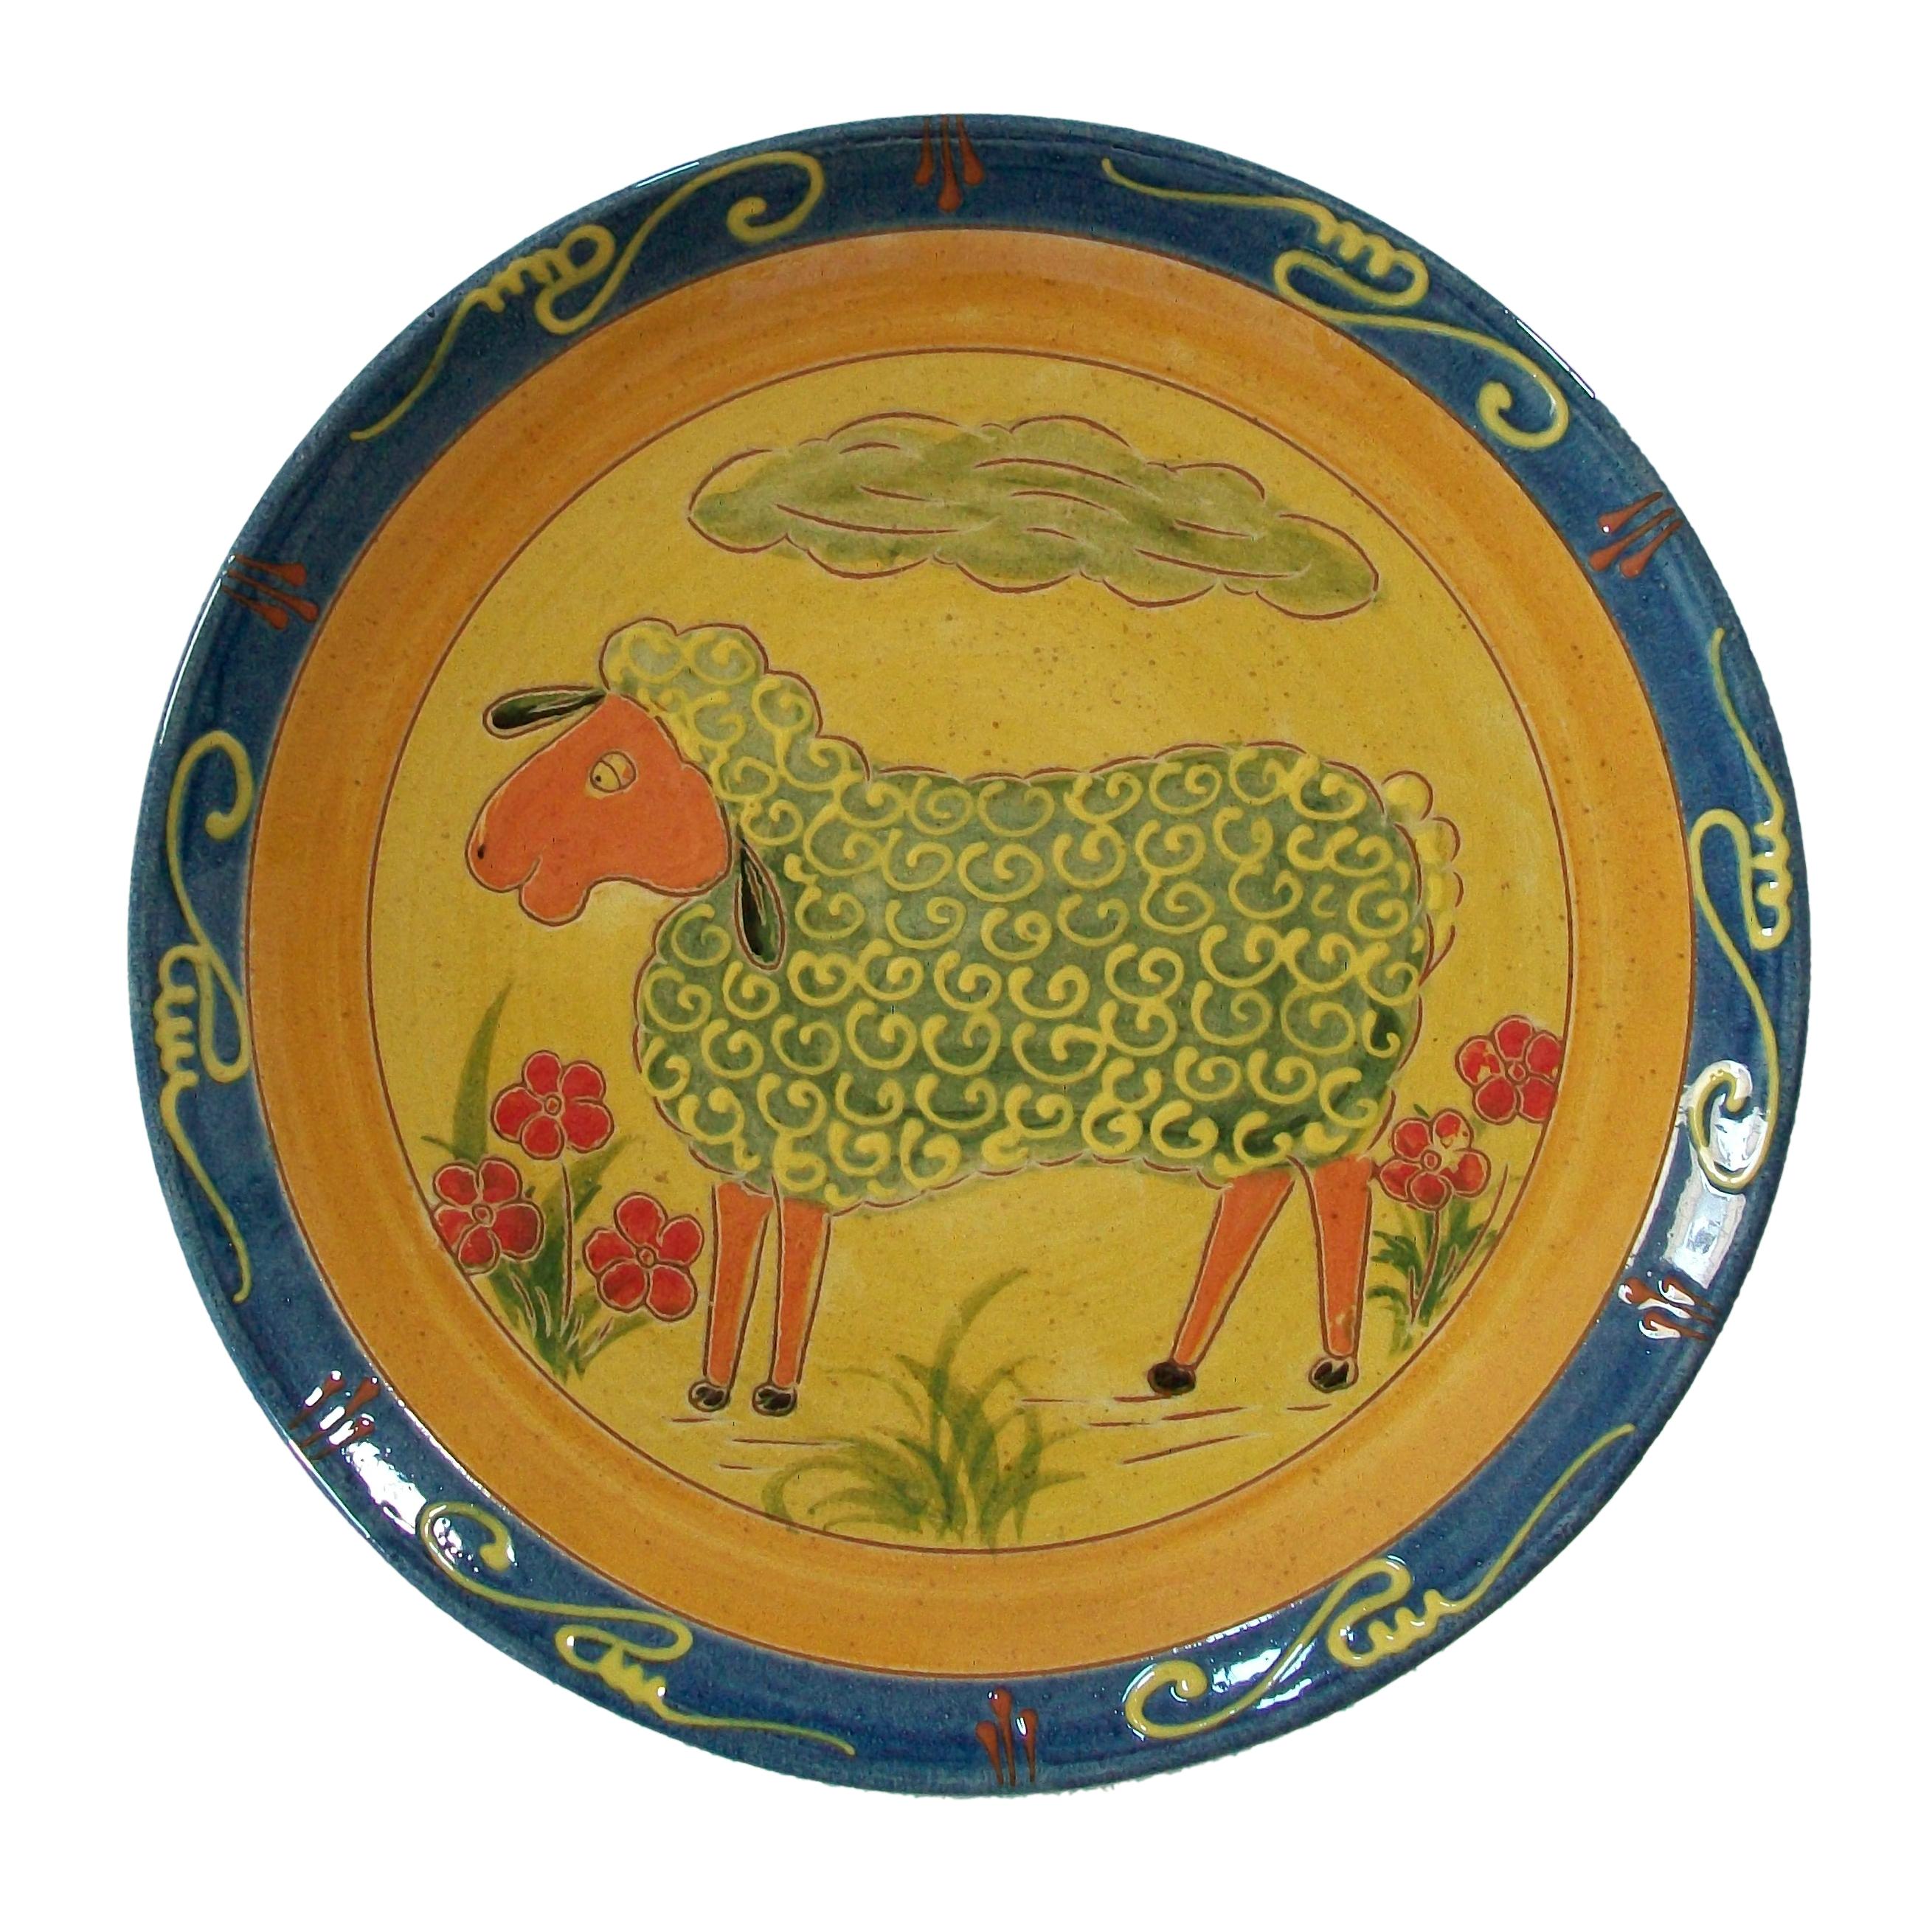 M. MIXA?HE - Vintage folk art pottery charger or wall plate - large size - hand made and hand painted and incised with a sheep and flowers - applied slip decorative scrolls to the banded border - stylized leafy grass sprays to the back border -